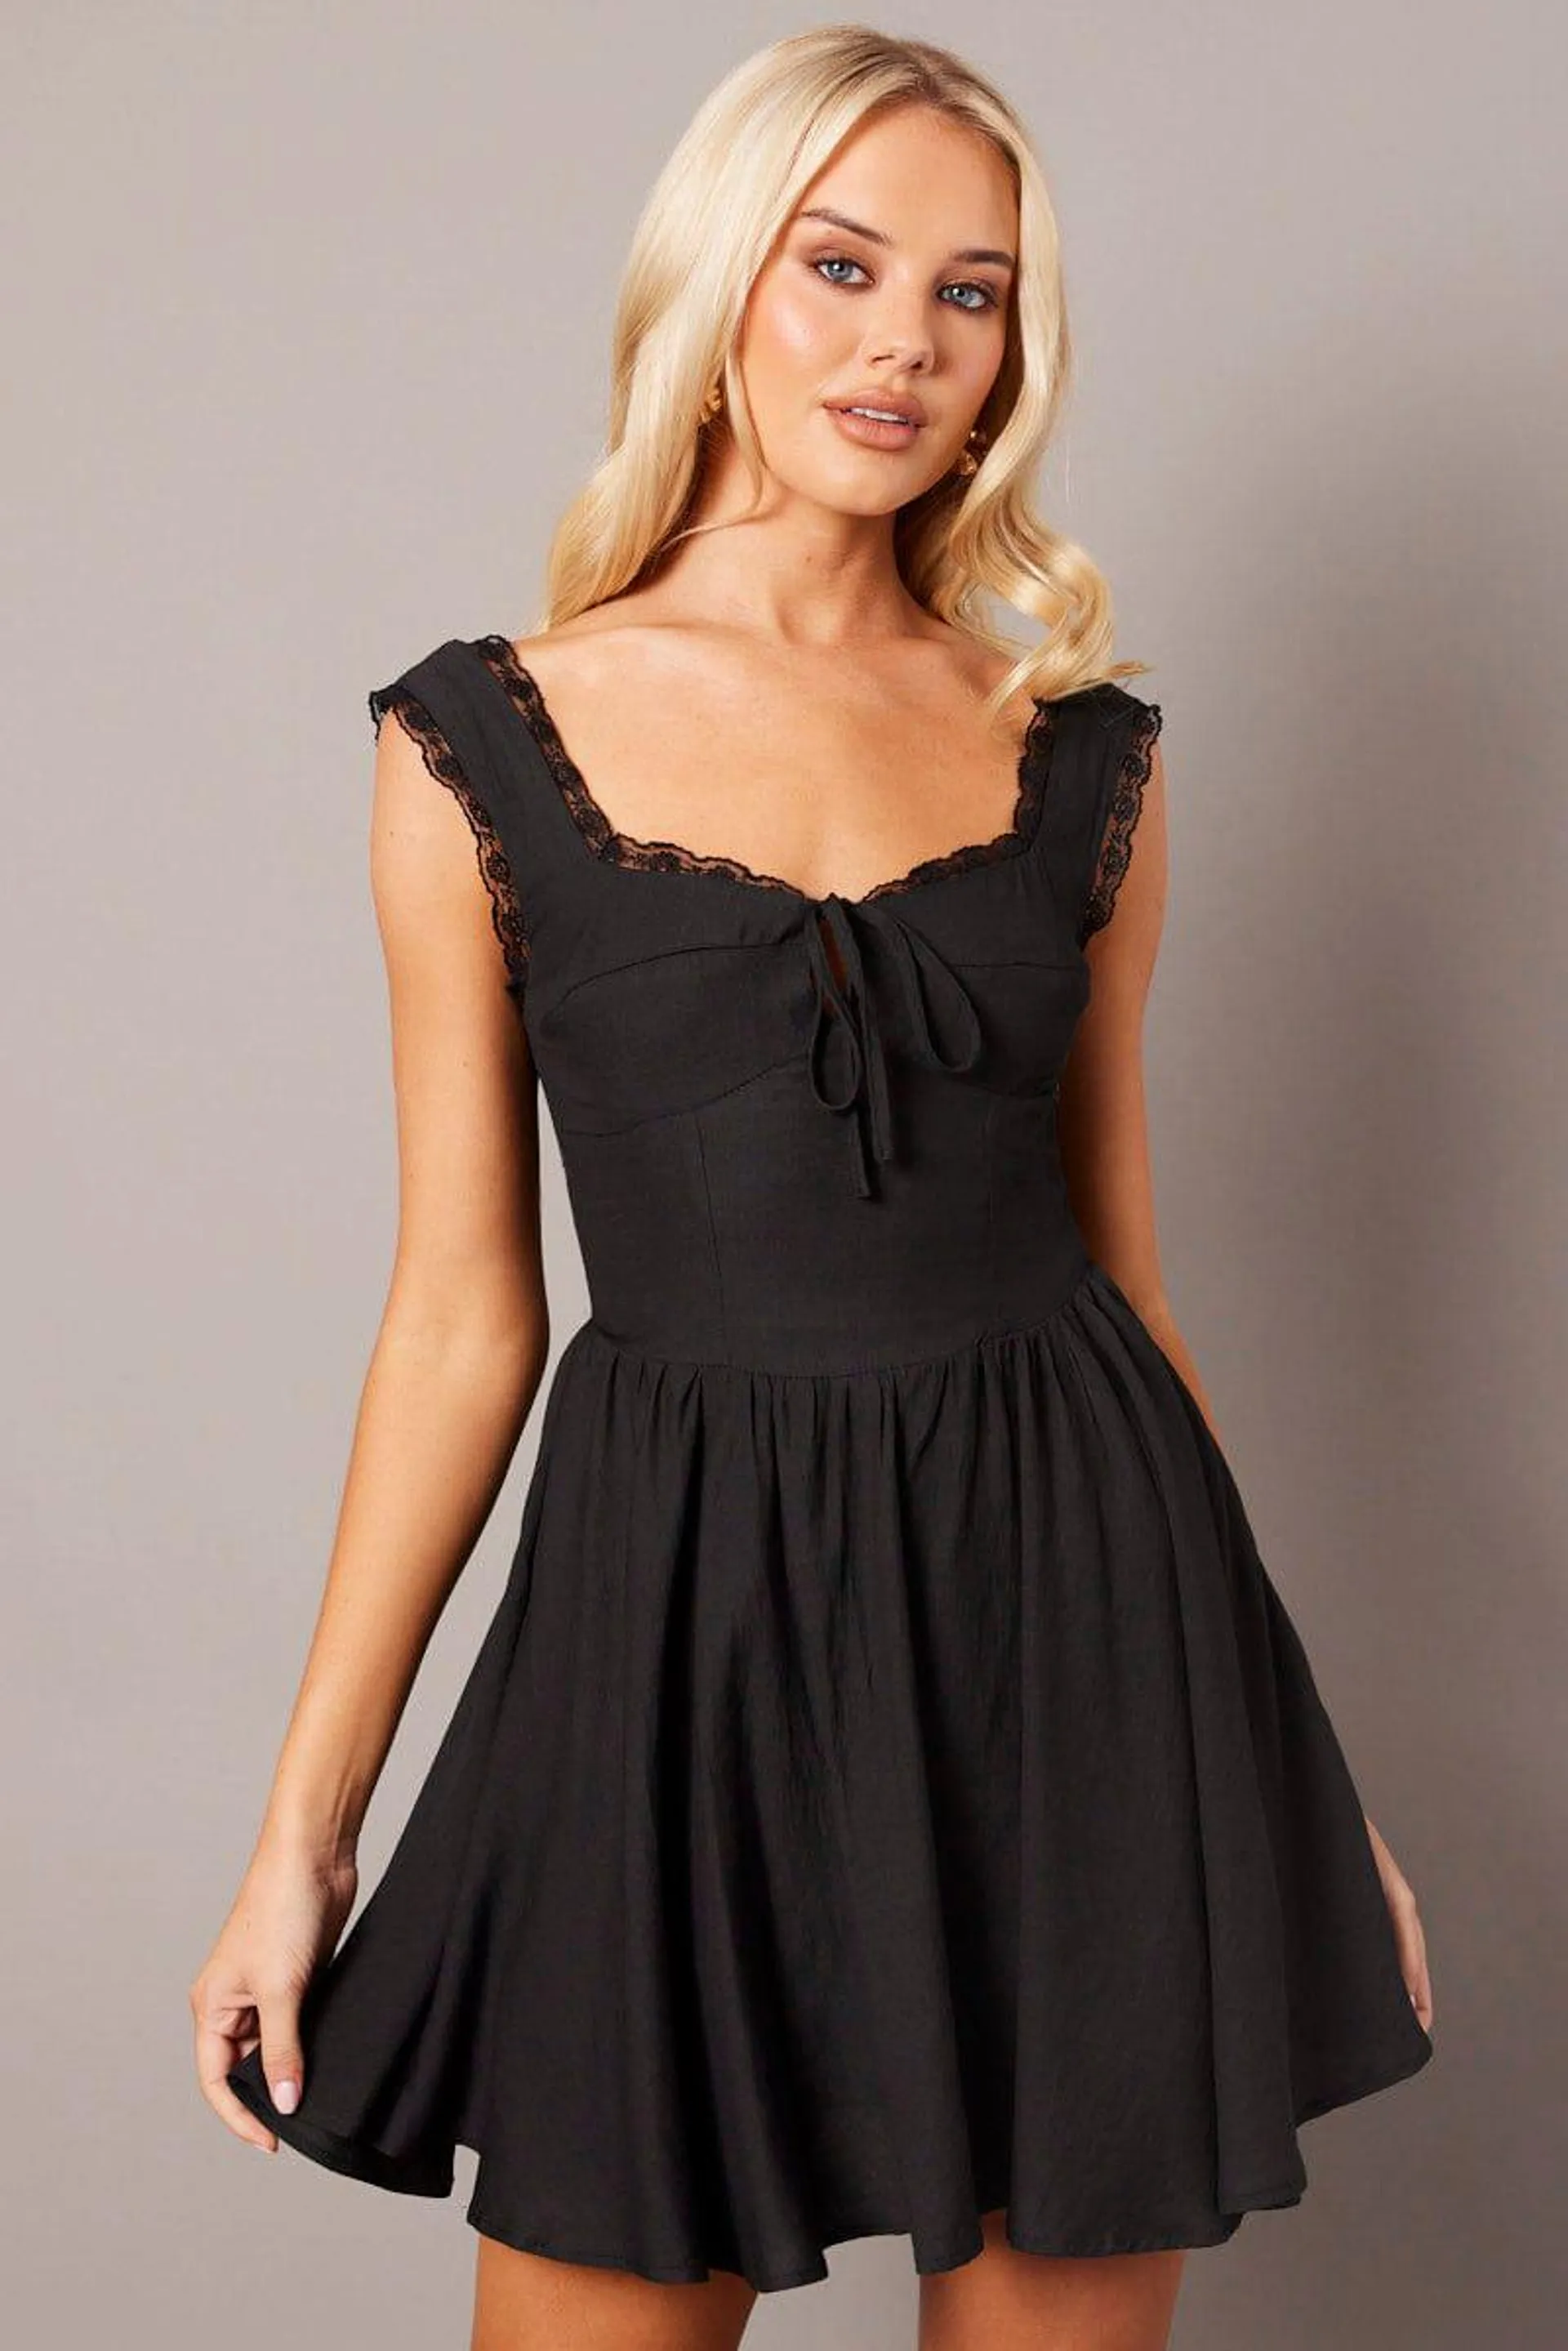 Black Fit and Flare Dress Sleeveless Lace Trim